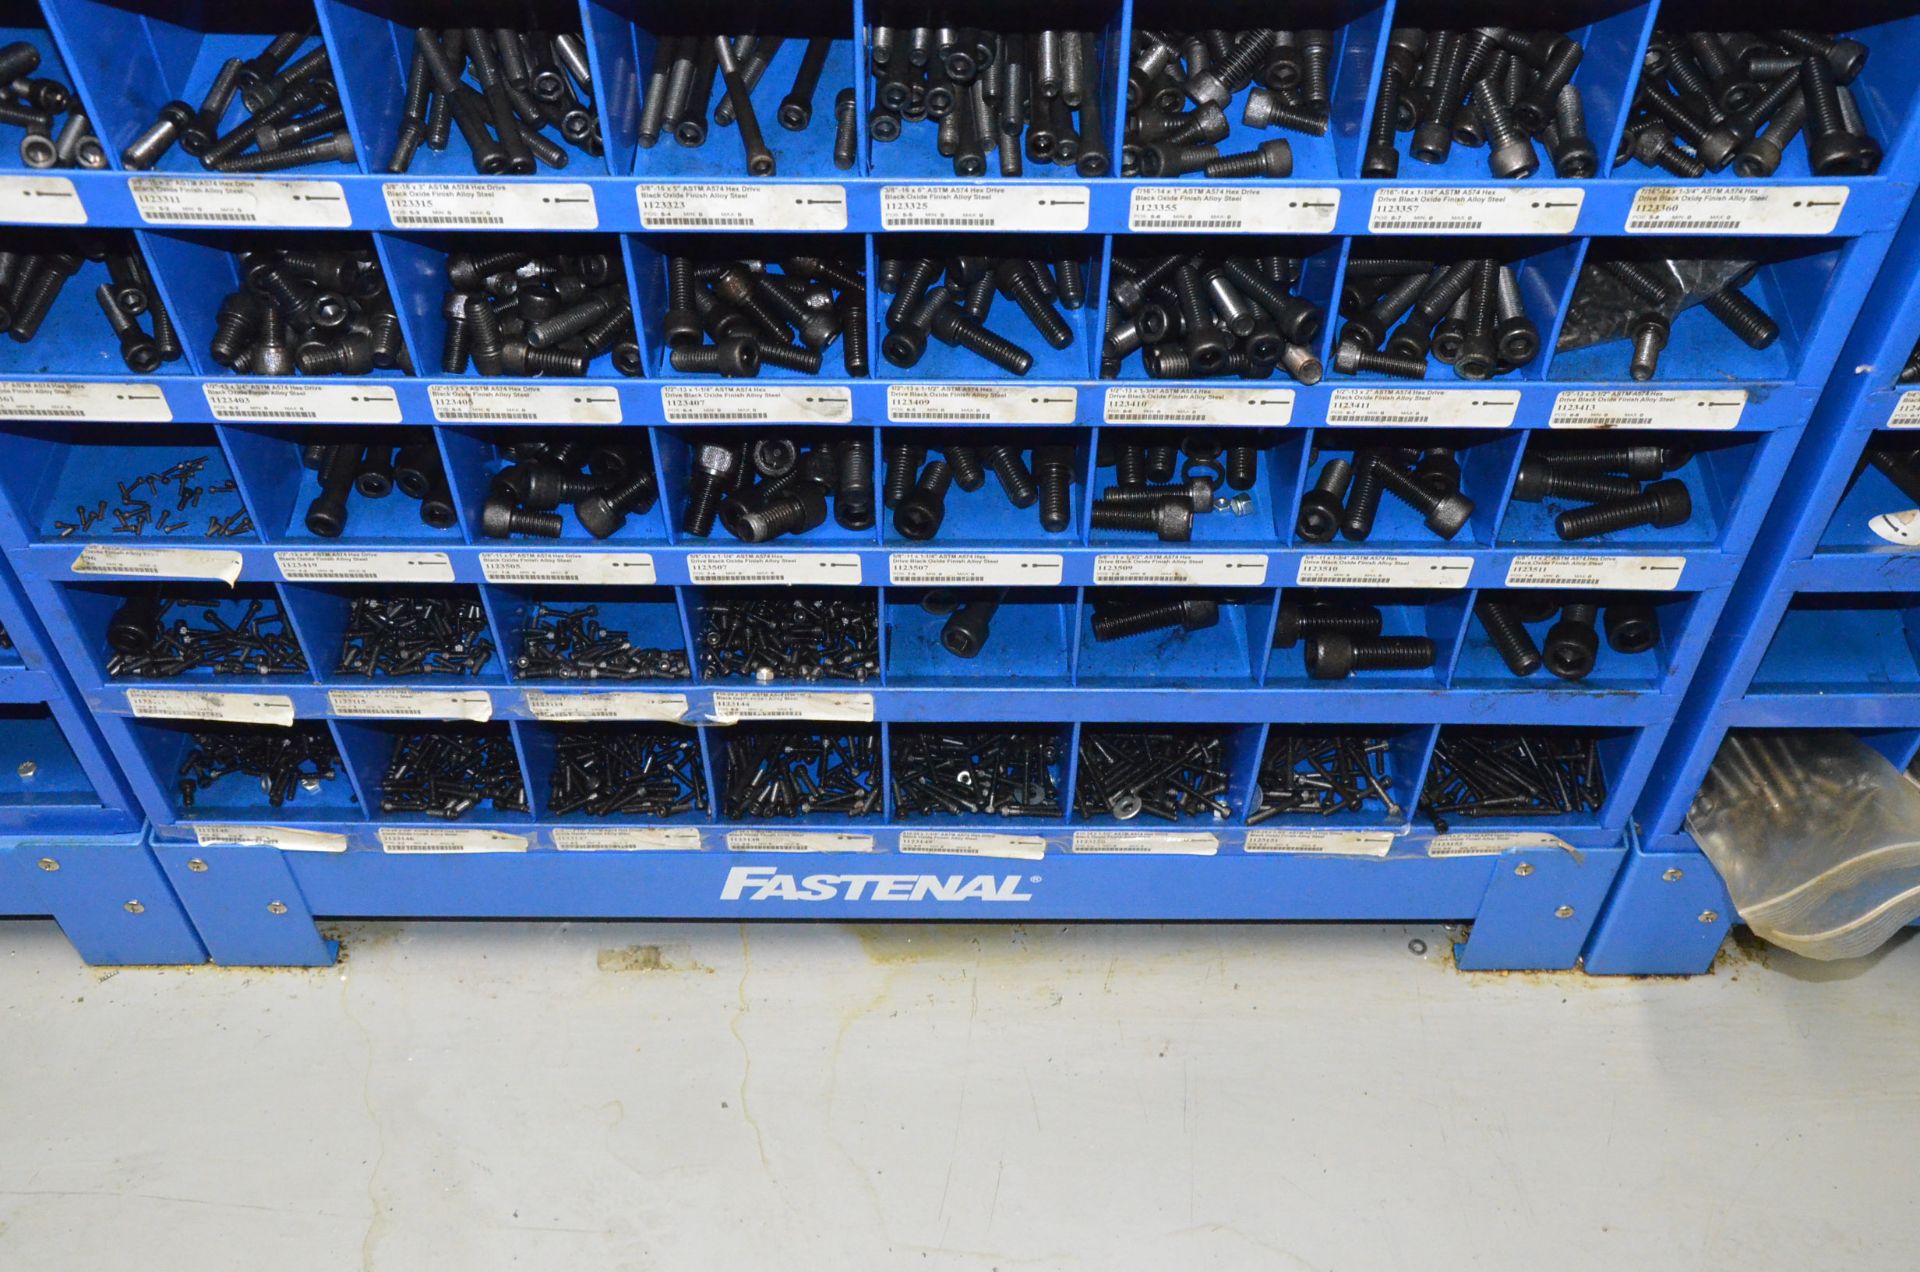 LOT/ FASTENAL PIGEON HOLE INDEX CABINETS WITH FASTENING HARDWARE - Image 5 of 11